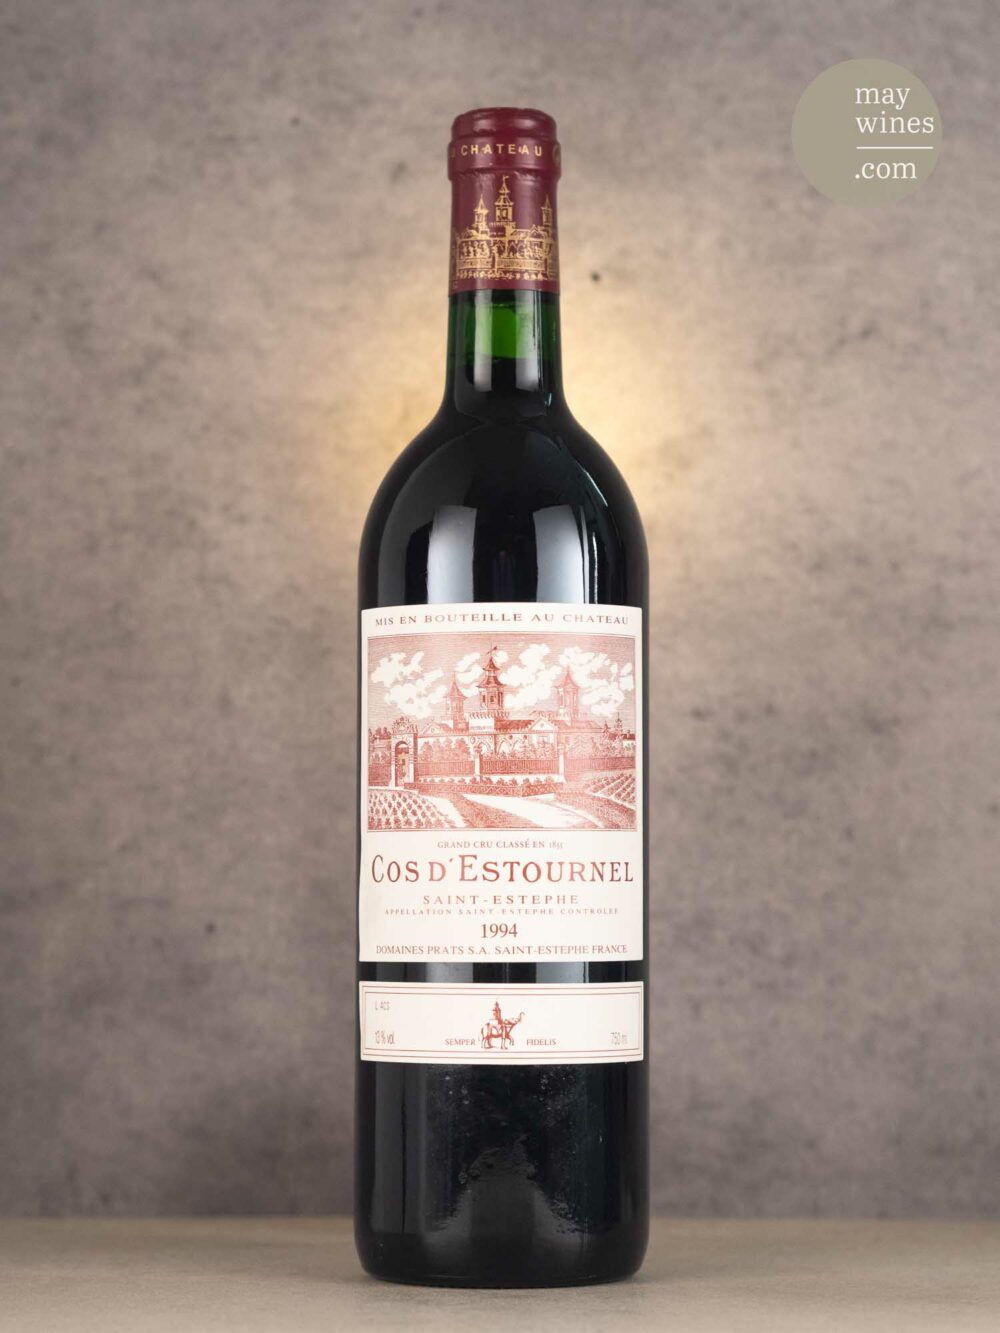 May Wines – Rotwein – 1994 Château Cos d'Estournel